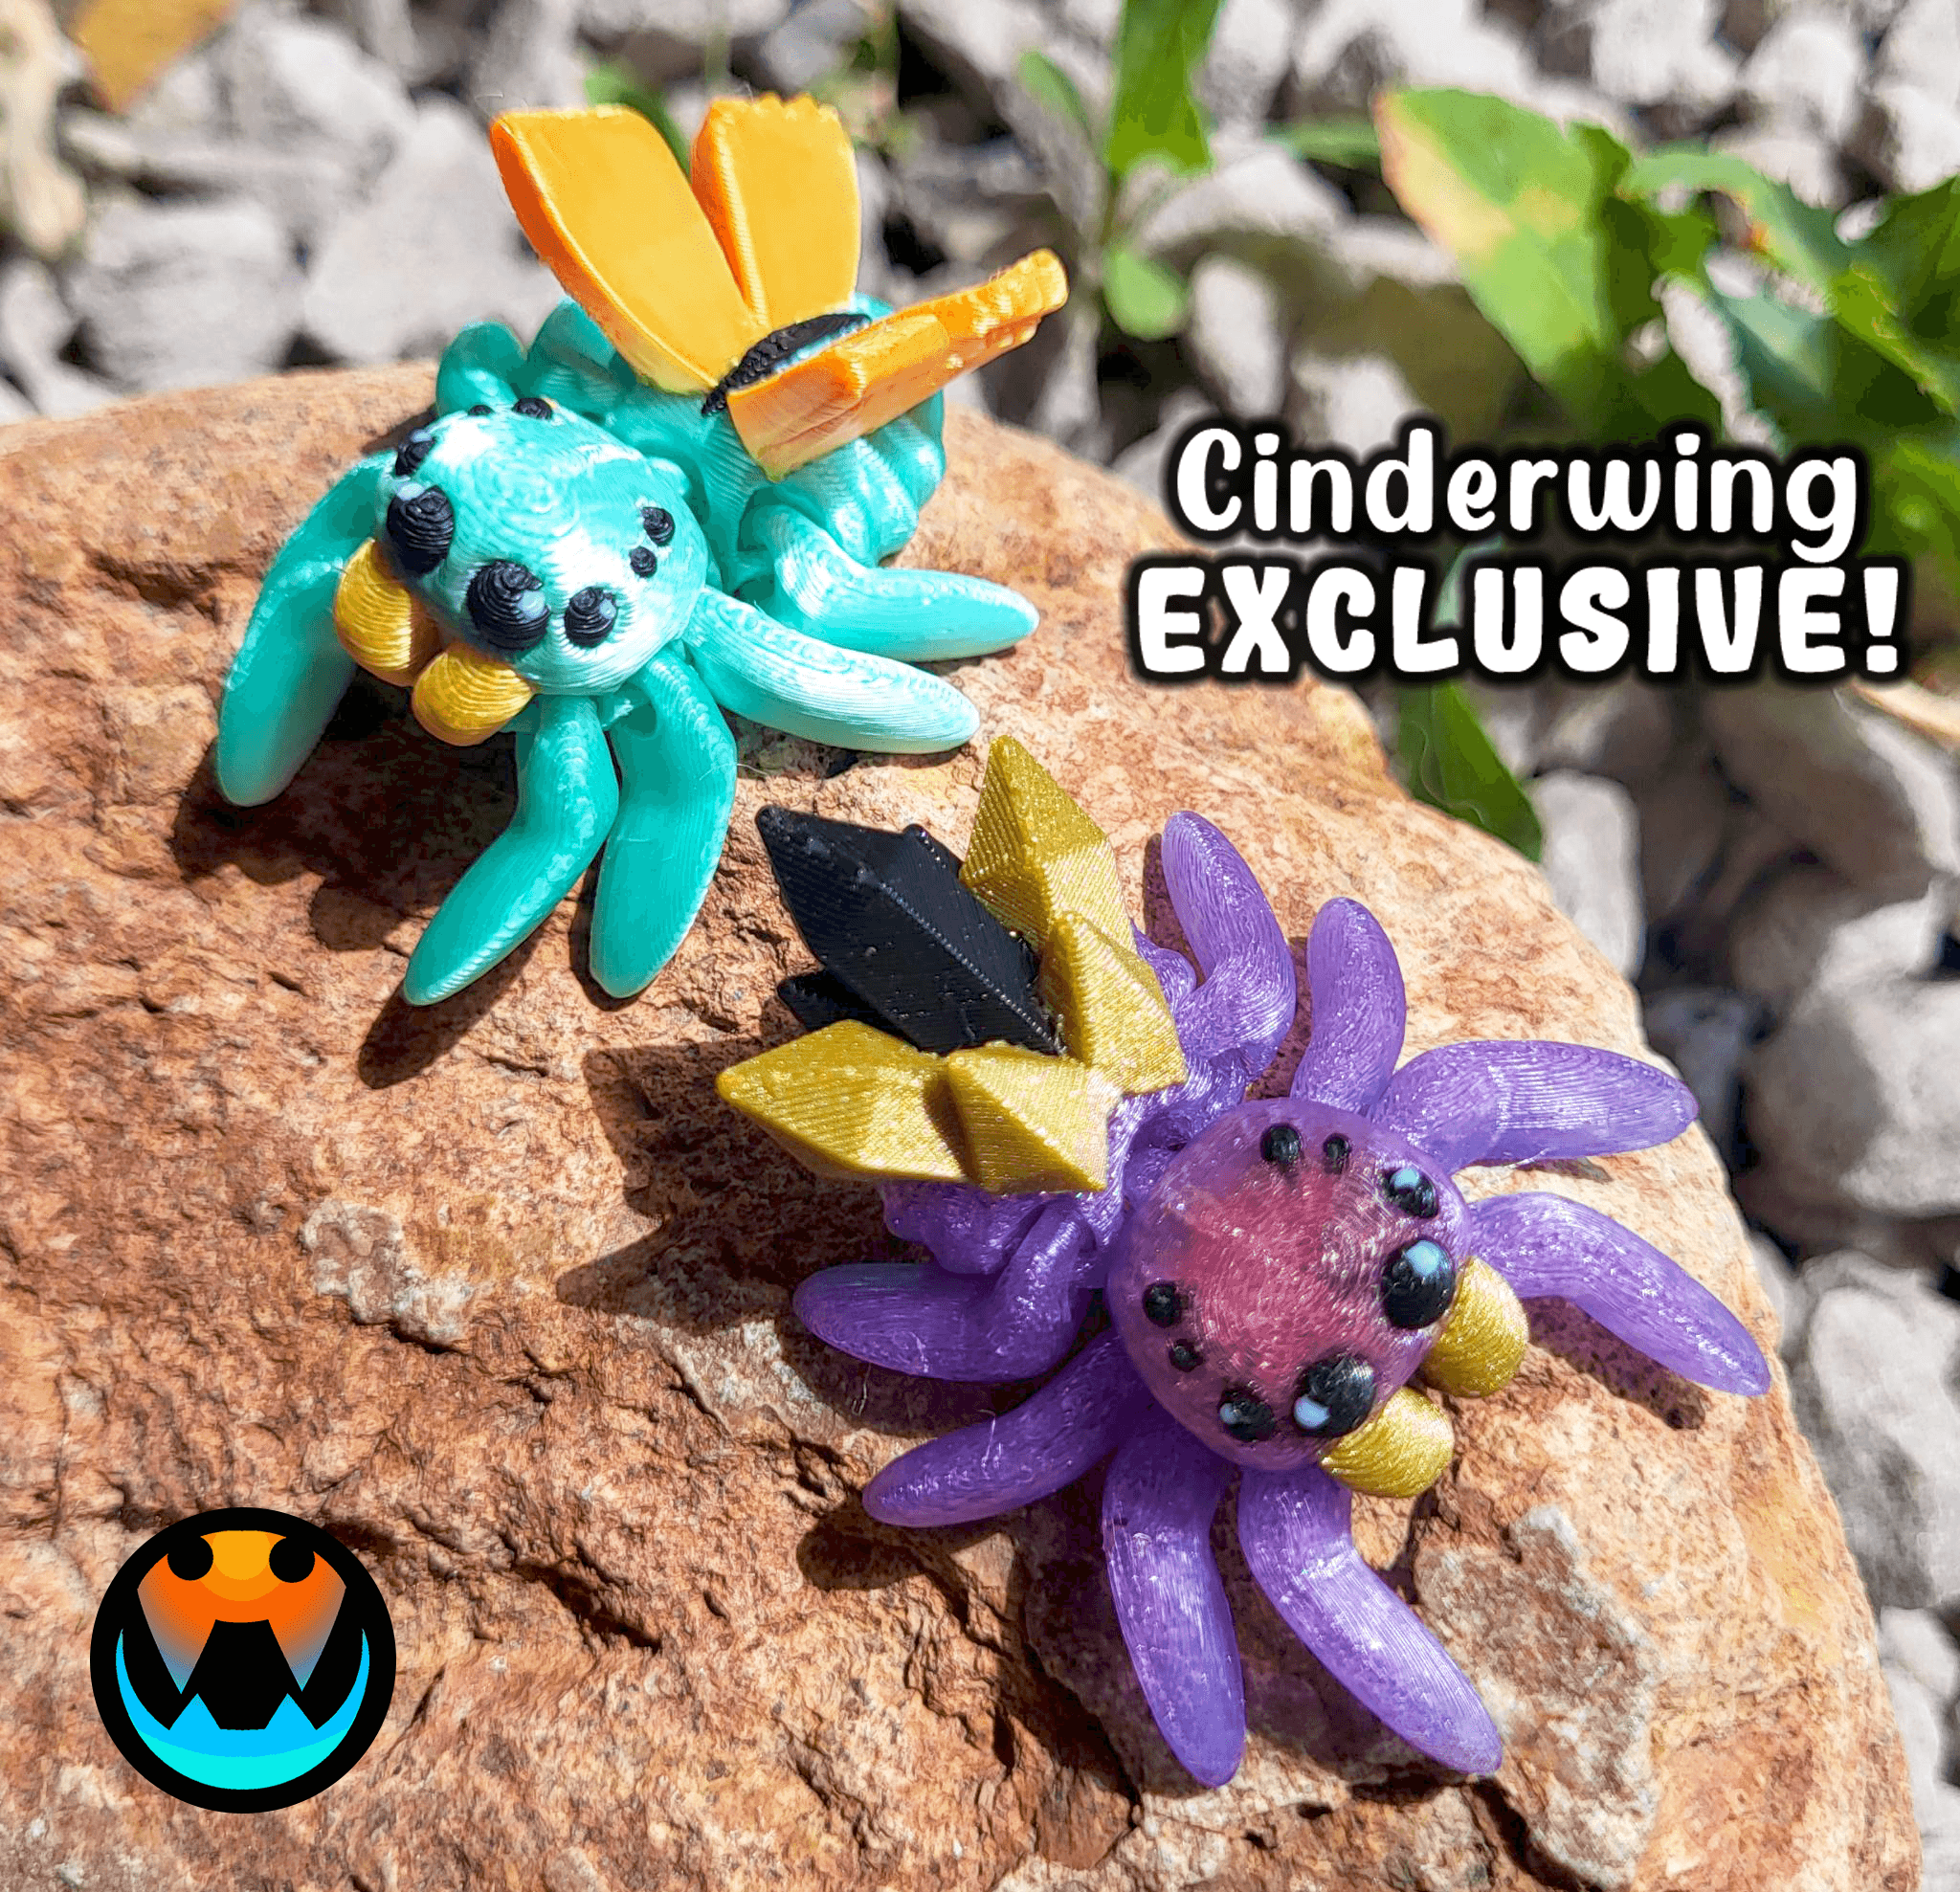 Member Model Drop! Tiny Crystal and Fairy Spiders